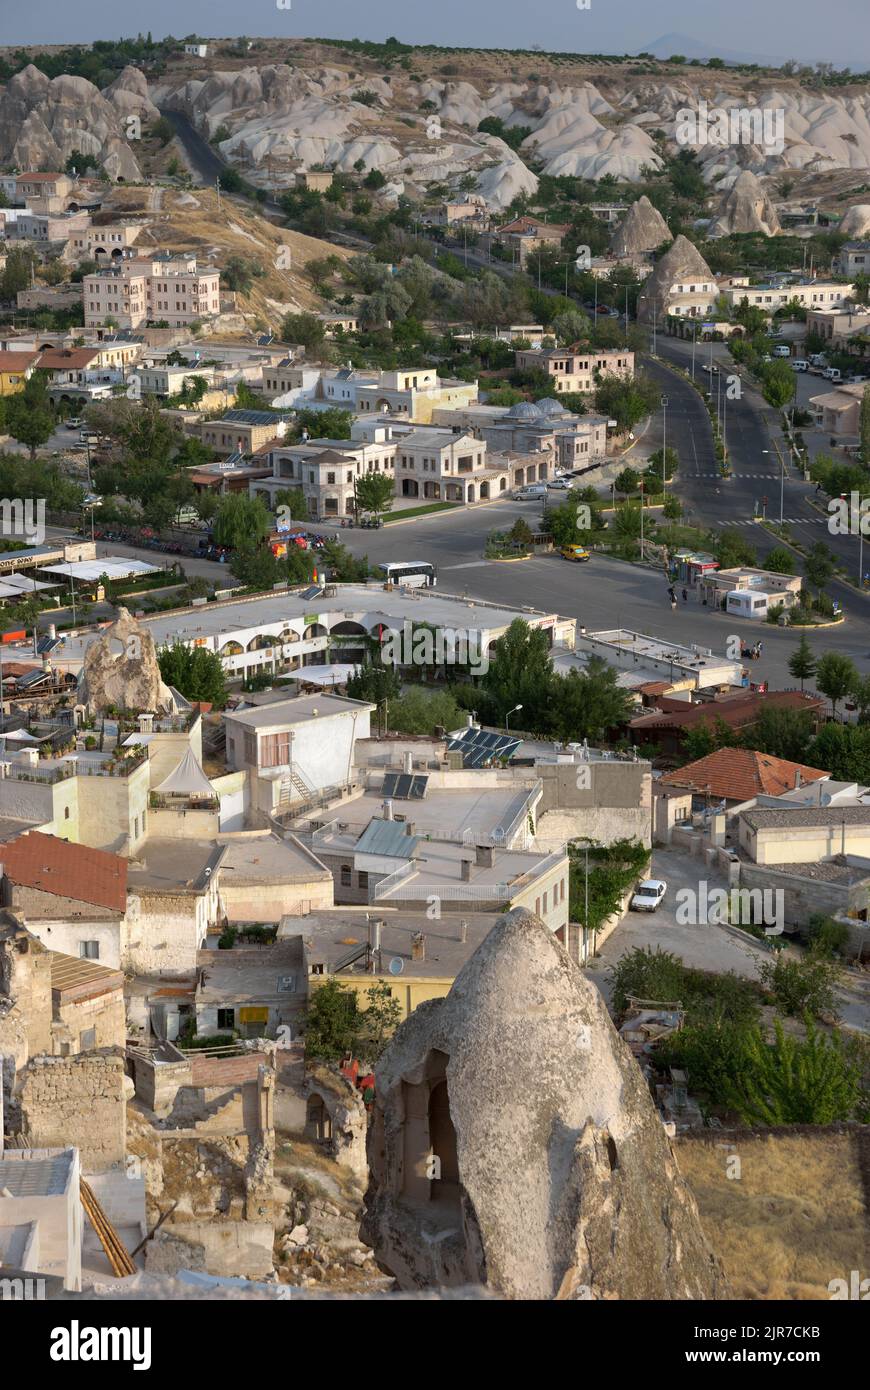 Aerial view of Goreme town in Cappadocia, Turkey, the centre of Cappadocia National Park, listed as UNESCO World Heritage site Stock Photo